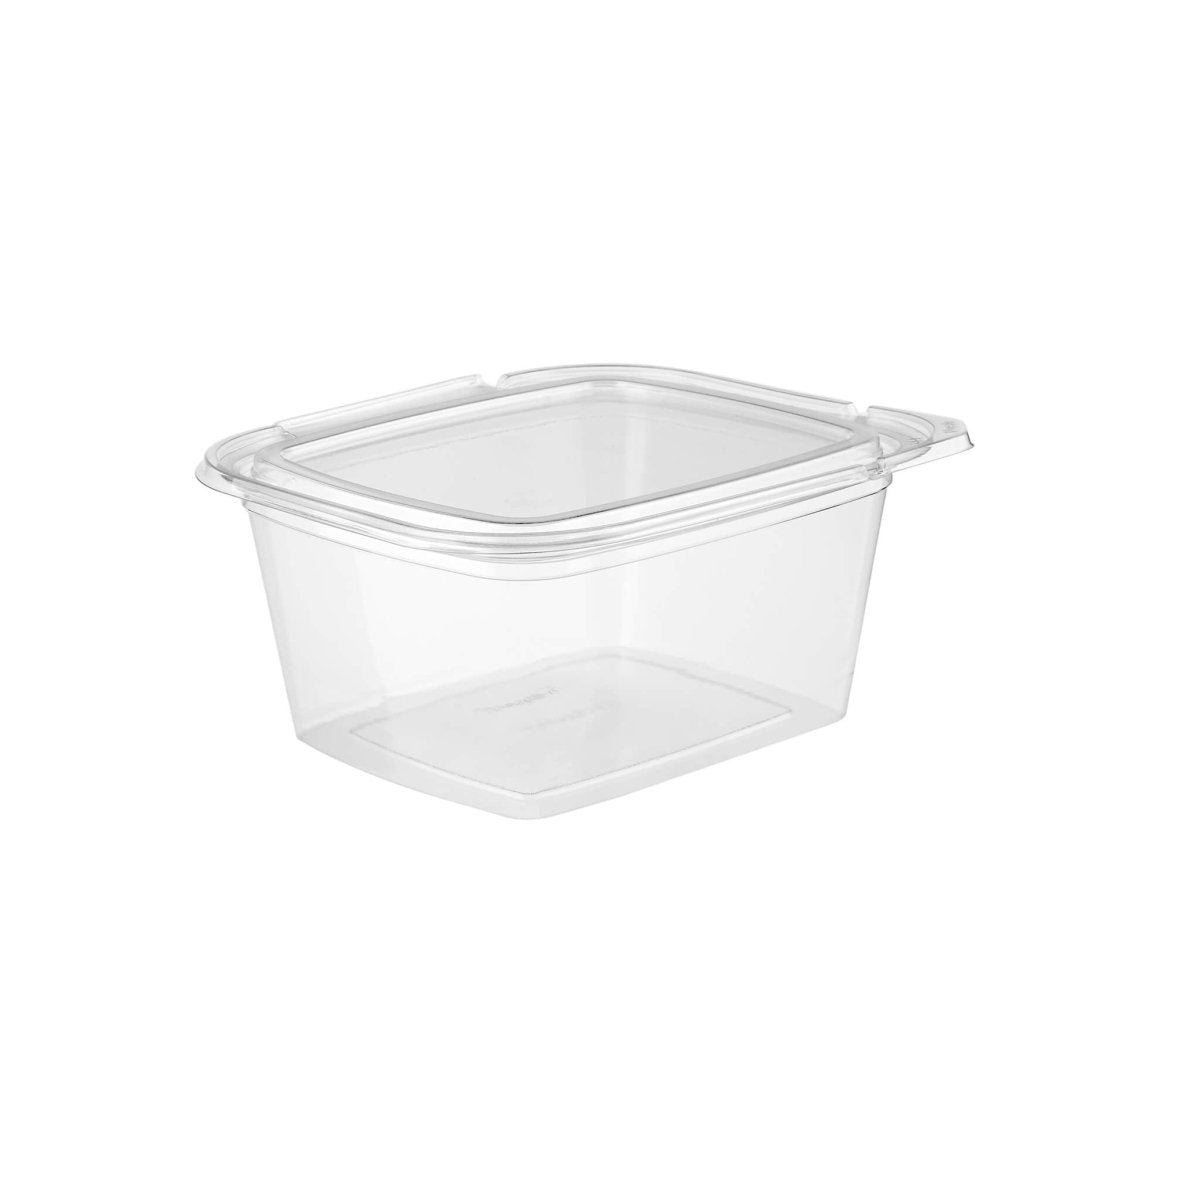 Tamper Evident Square Clear Pet Container - hotpackwebstore.com - Tamper Evident Containers